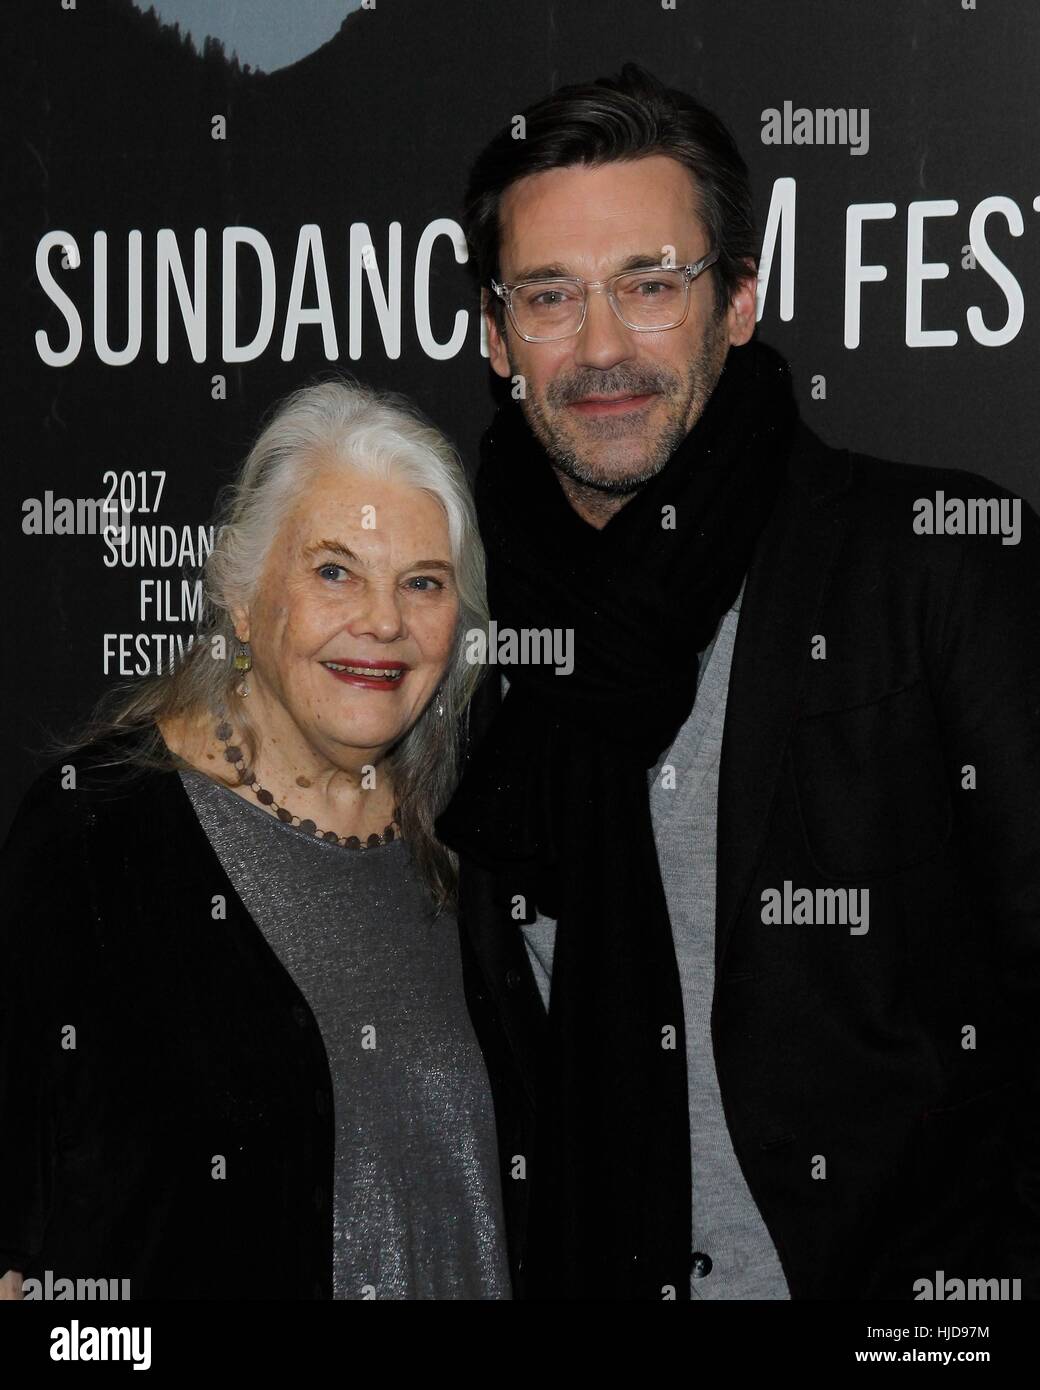 New York, NY, USA. 23rd Jan, 2017. Lois Smith, Jon Hamm at arrivals for MARJORIE PRIME Premiere at Sundance Film Festival 2017, Eccles Theatre, New York, USA. January 23, 2017. Credit: James Atoa/Everett Collection/Alamy Live News Stock Photo